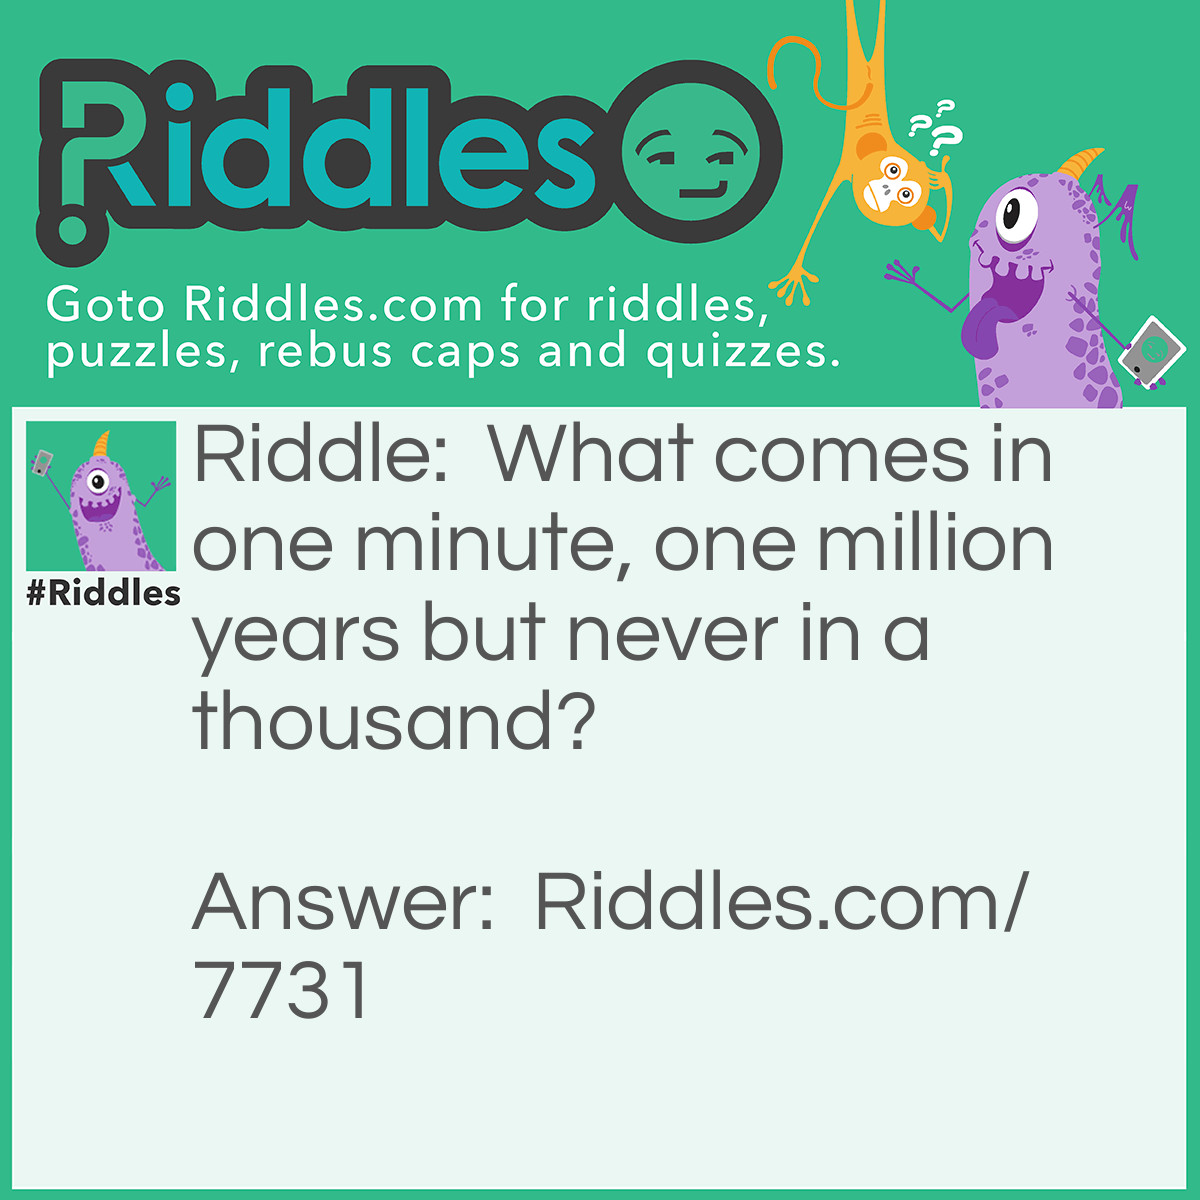 Riddle: What comes in one minute, one million years but never in a thousand? Answer: The letter M.